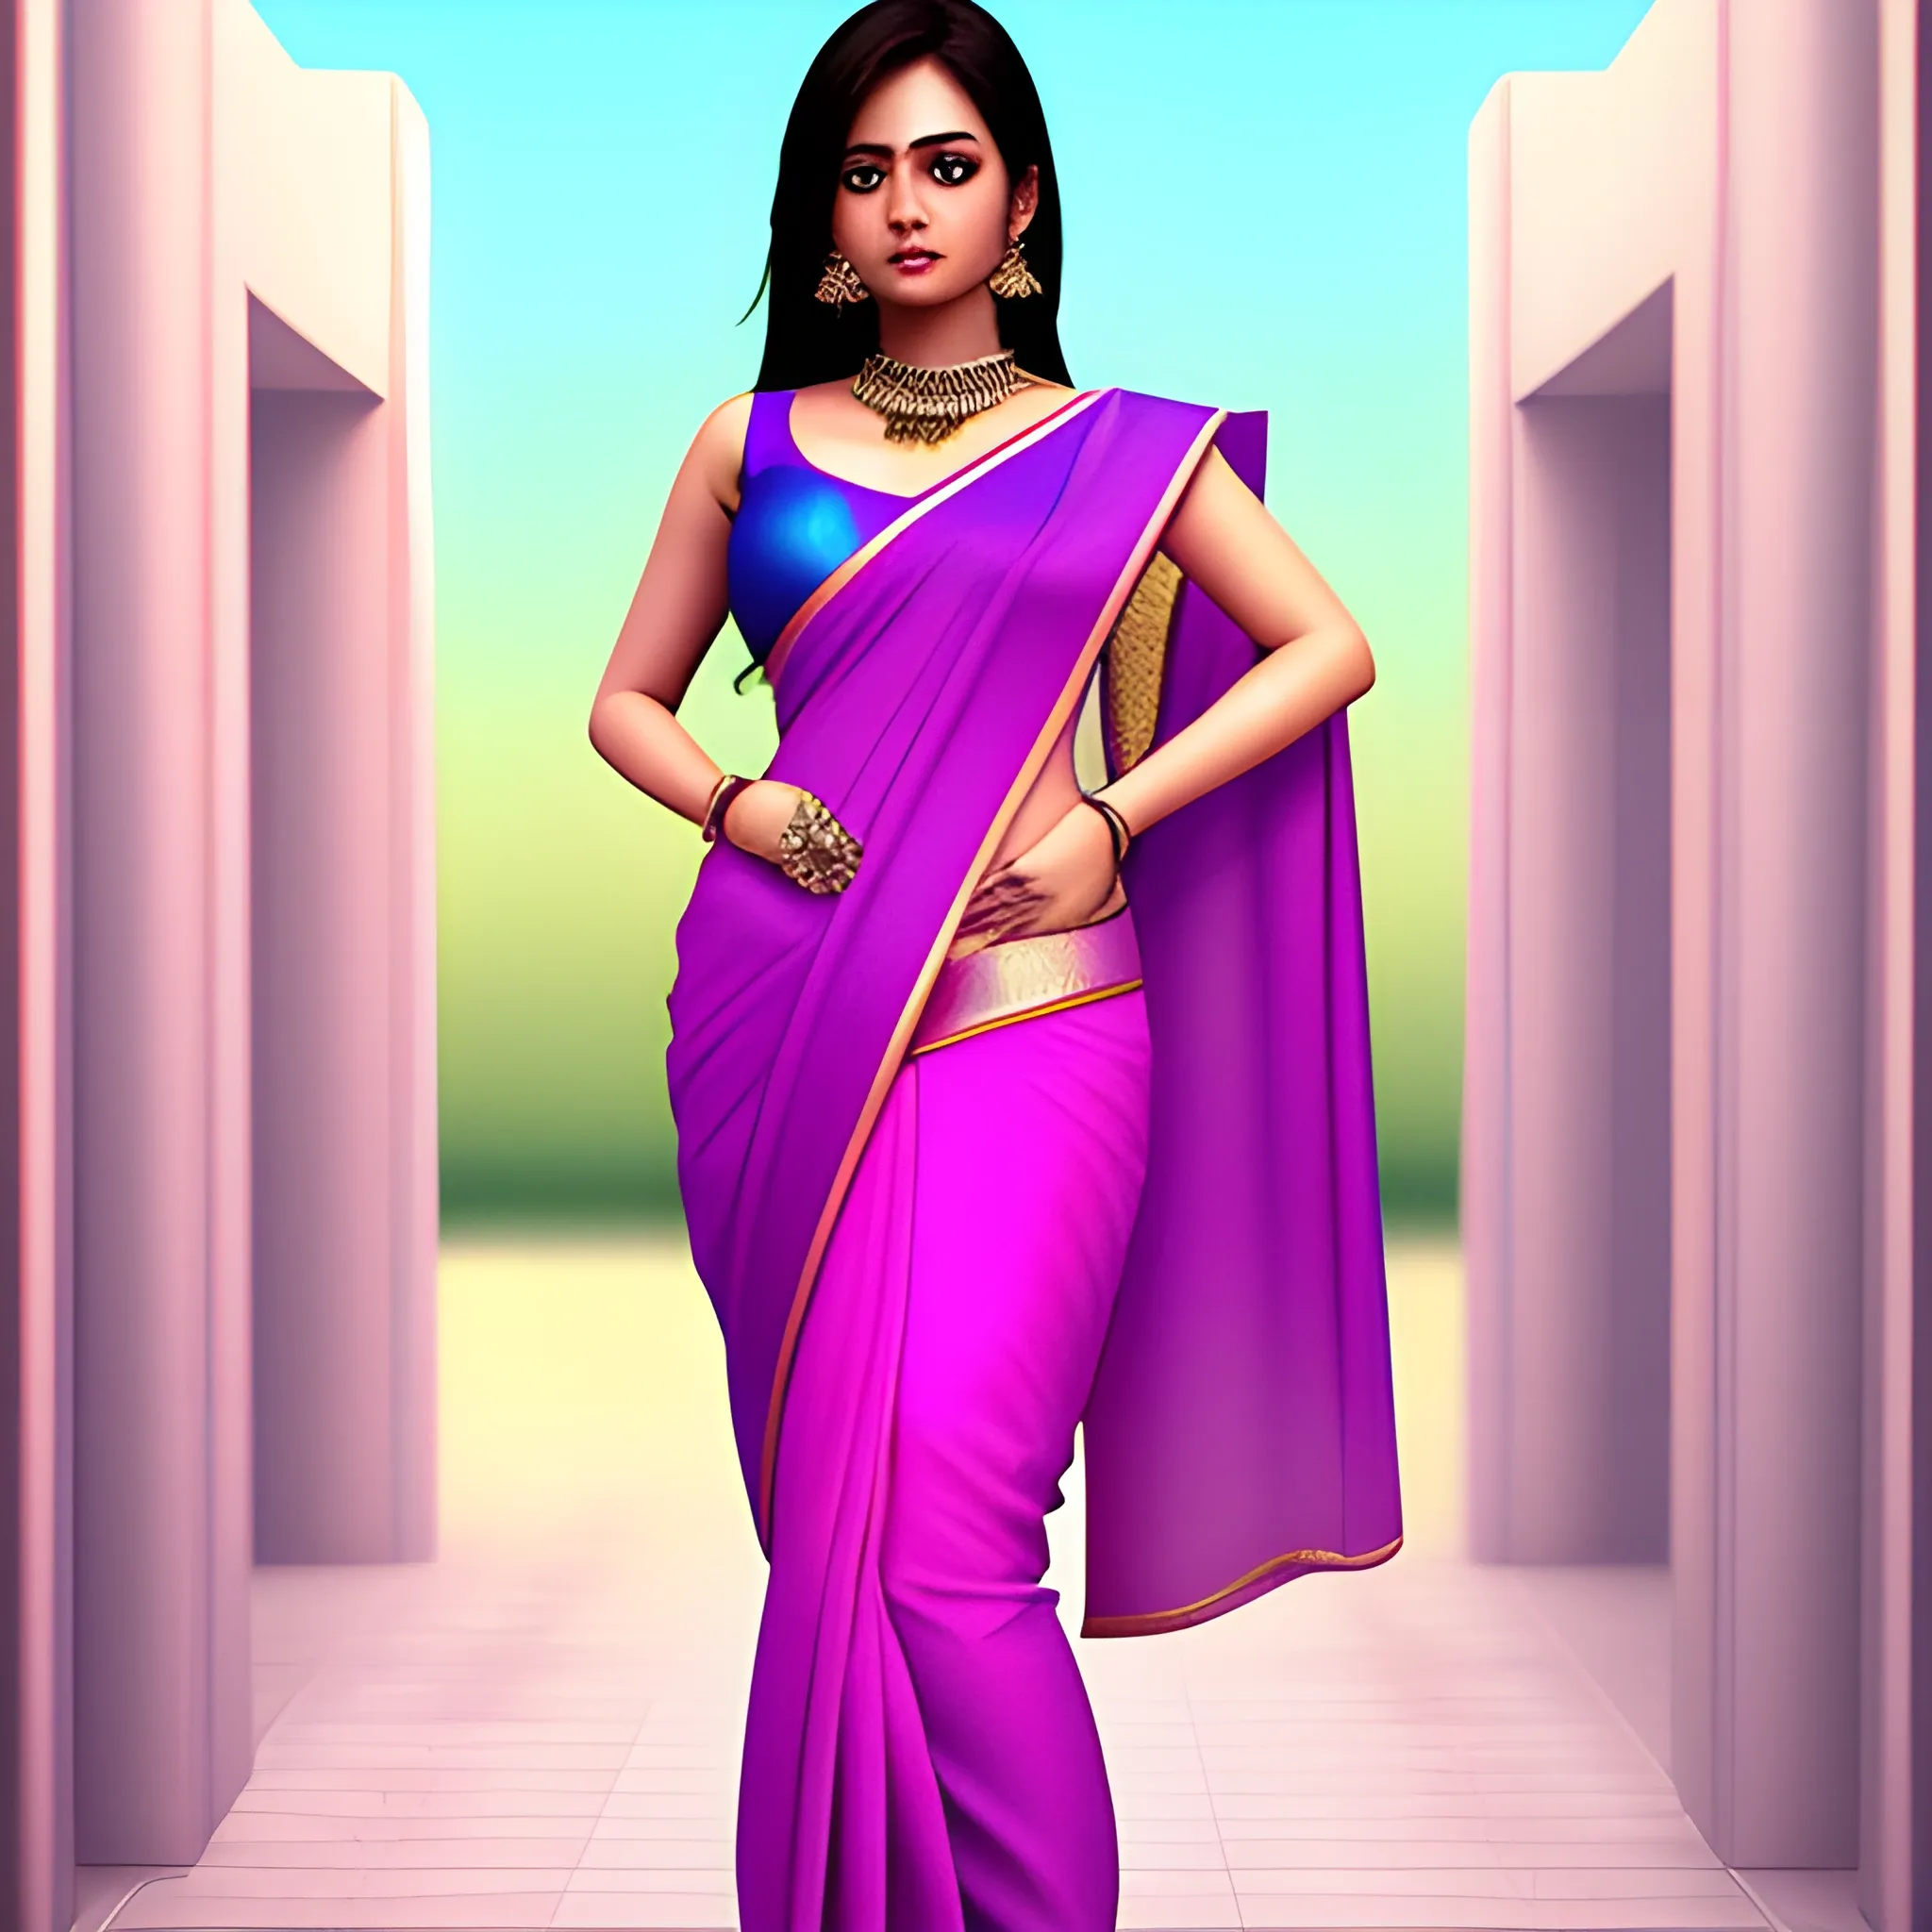 
Female Adult full sexy body in saree, , 3D